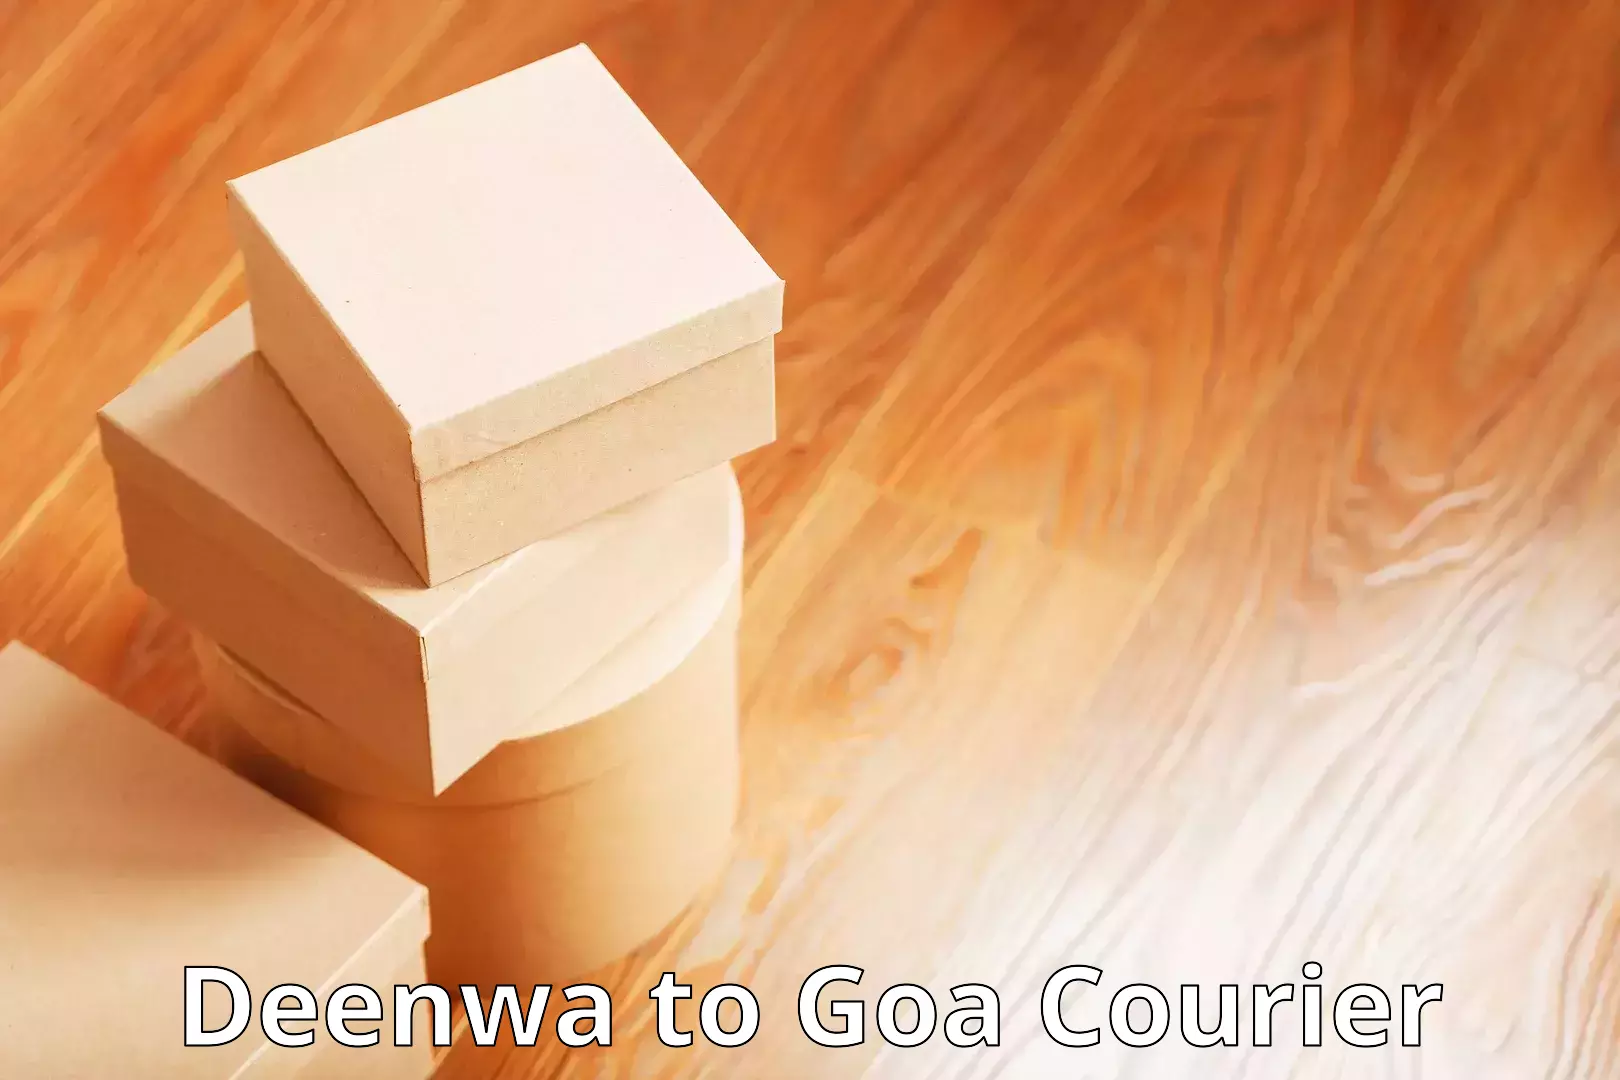 Cash on delivery service Deenwa to Goa